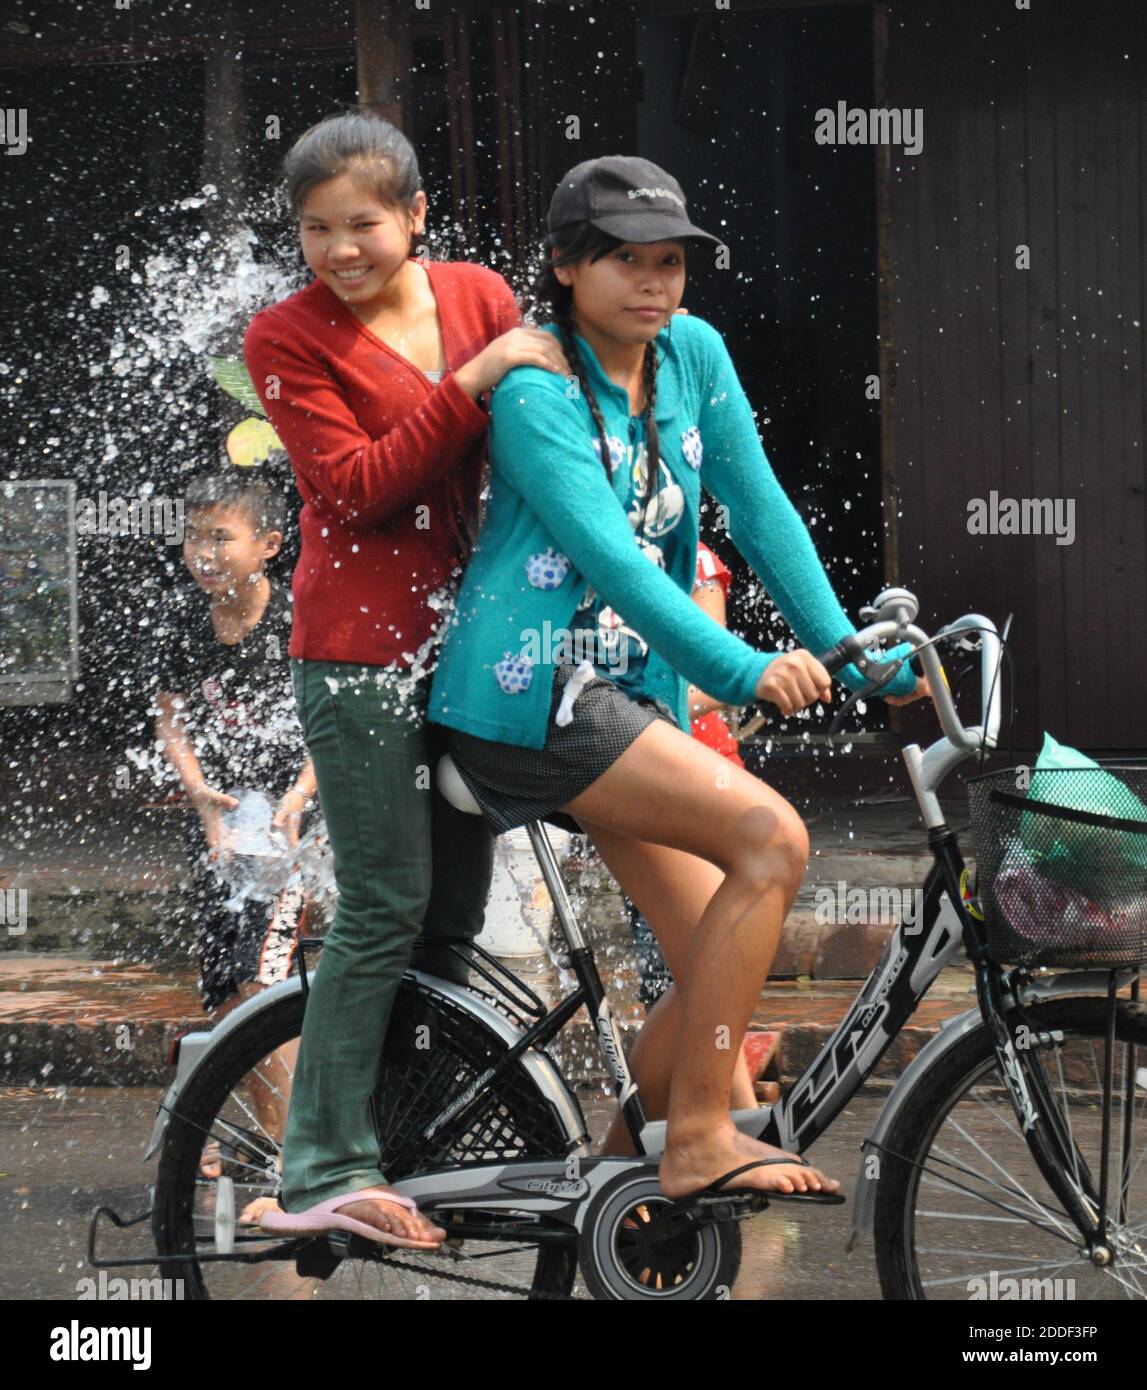 Two young girls on a bike being soaked by water as they pass a young boy enjoying the Songkran Water throwing festival. Stock Photo